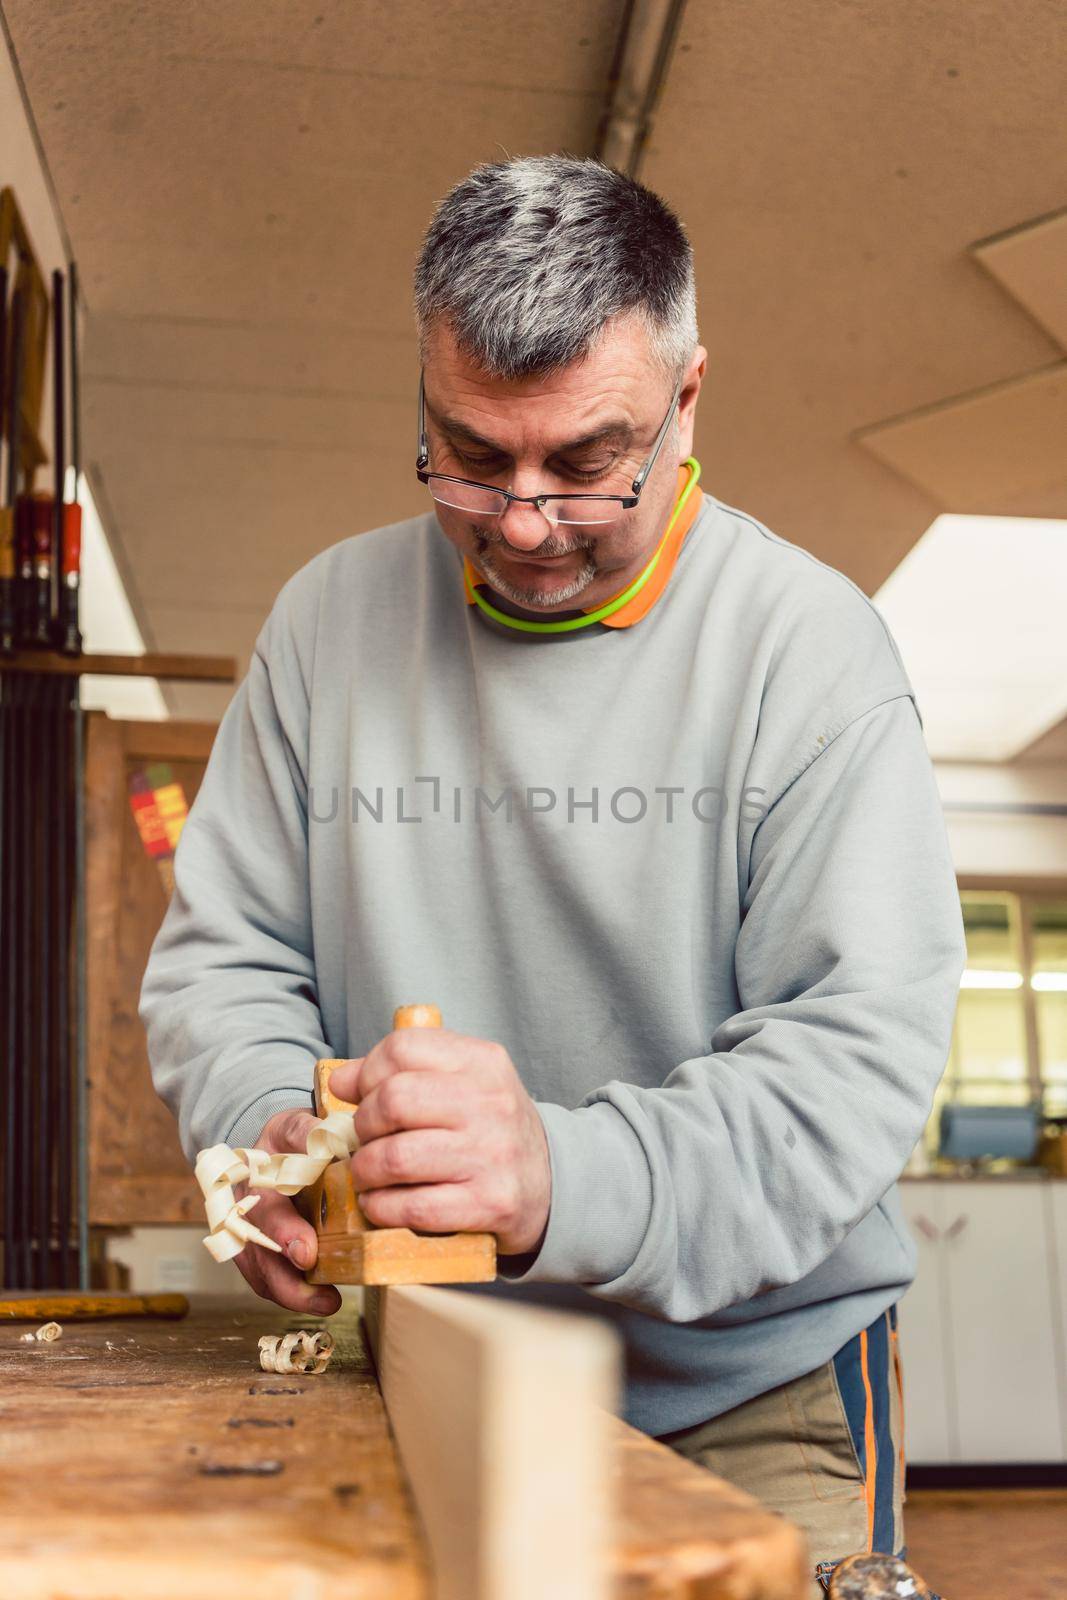 Experienced carpenter planing a board in his workshop